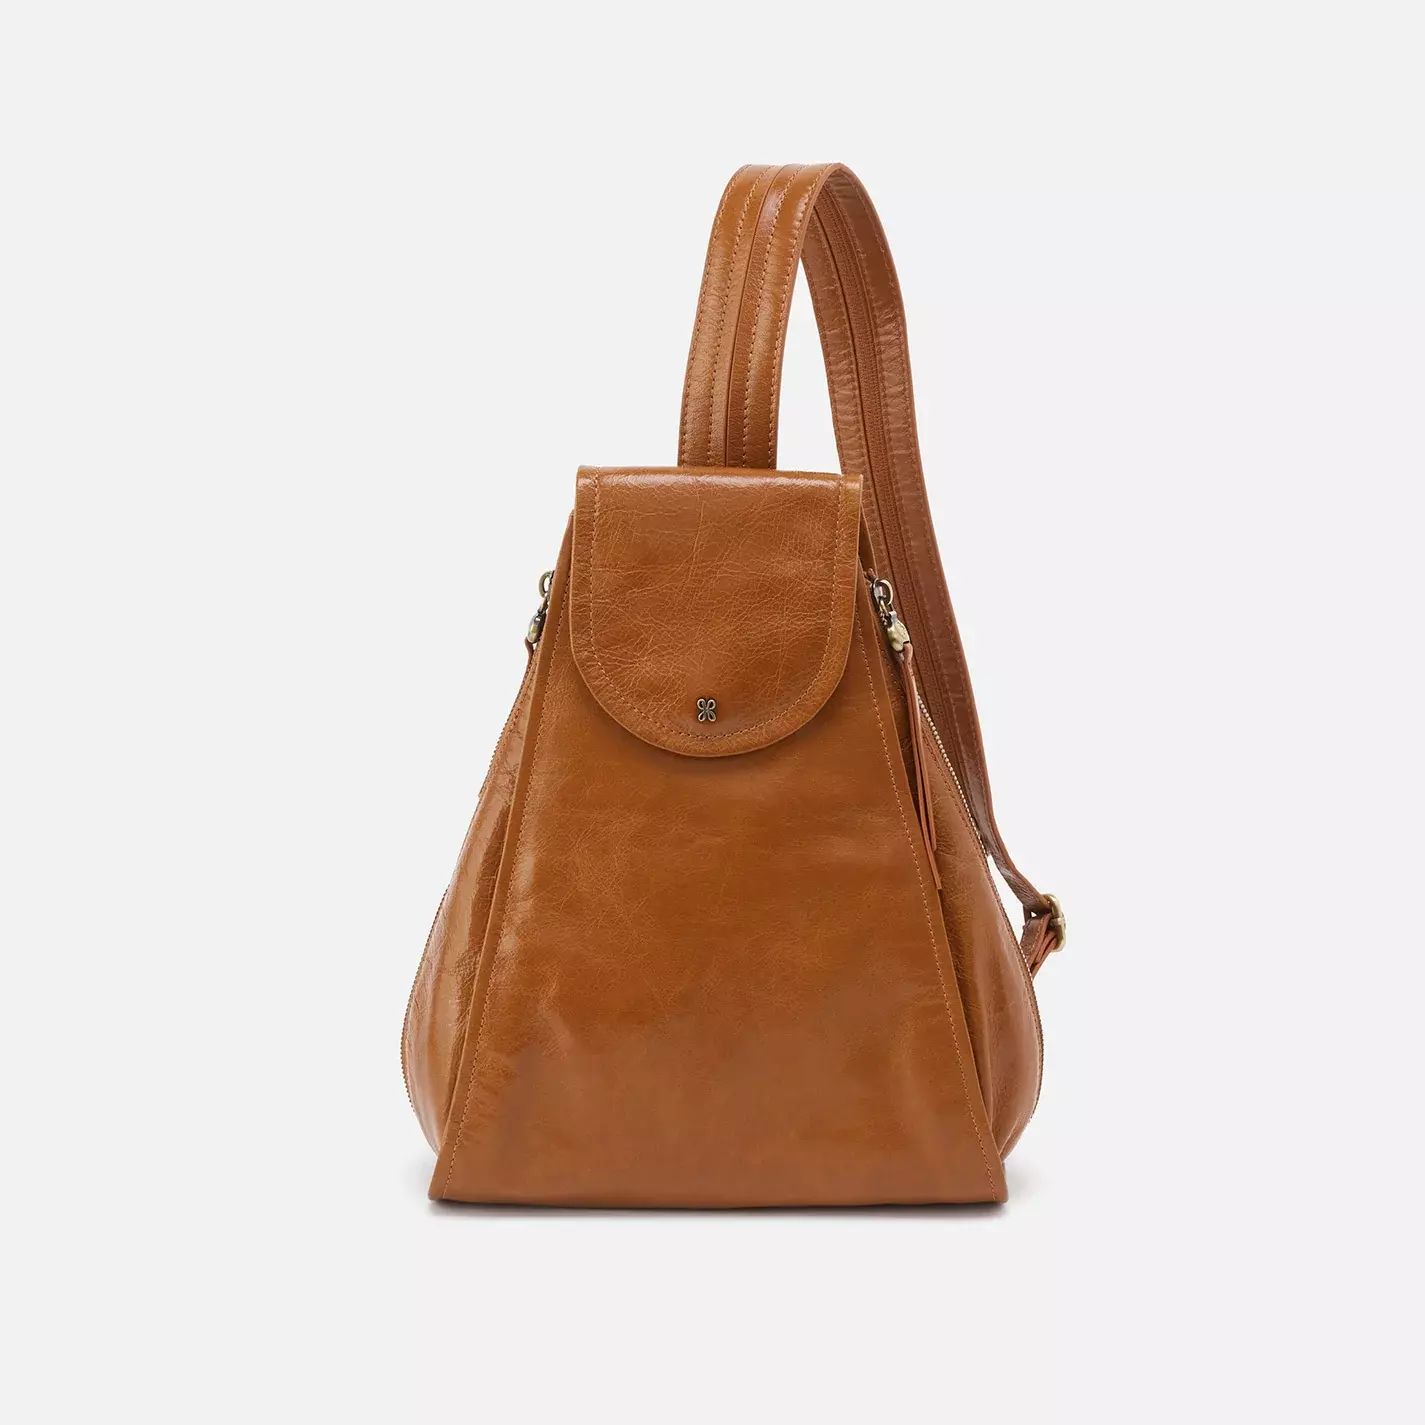 Betta Sling in Polished Leather - Truffle | HOBO Bags